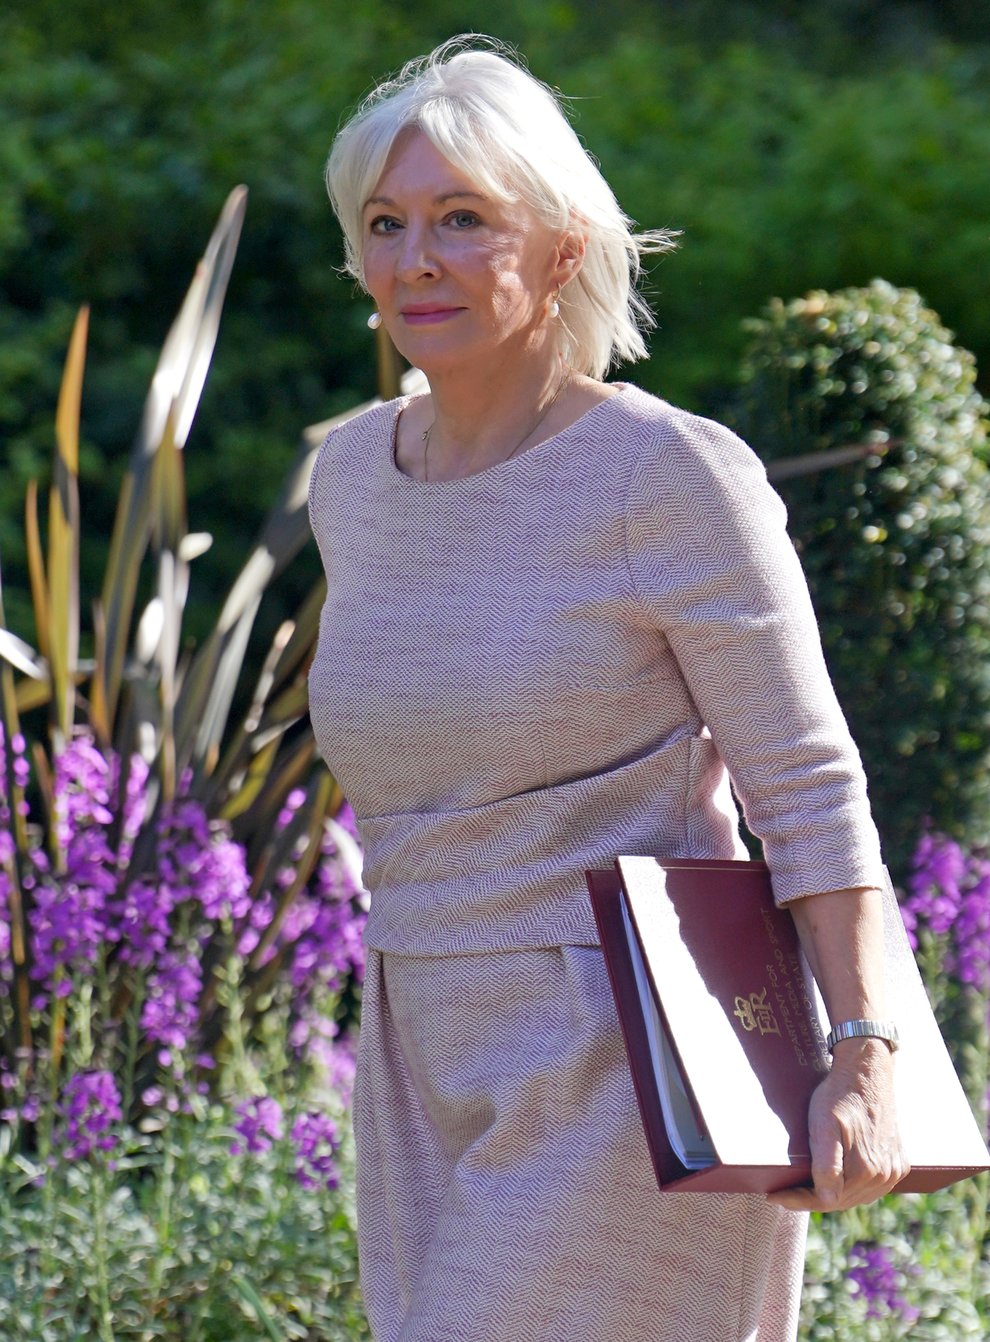 Culture Secretary Nadine Dorries arriving in Downing Street, London, for a Cabinet meeting. Picture date: Tuesday April 26, 2022.